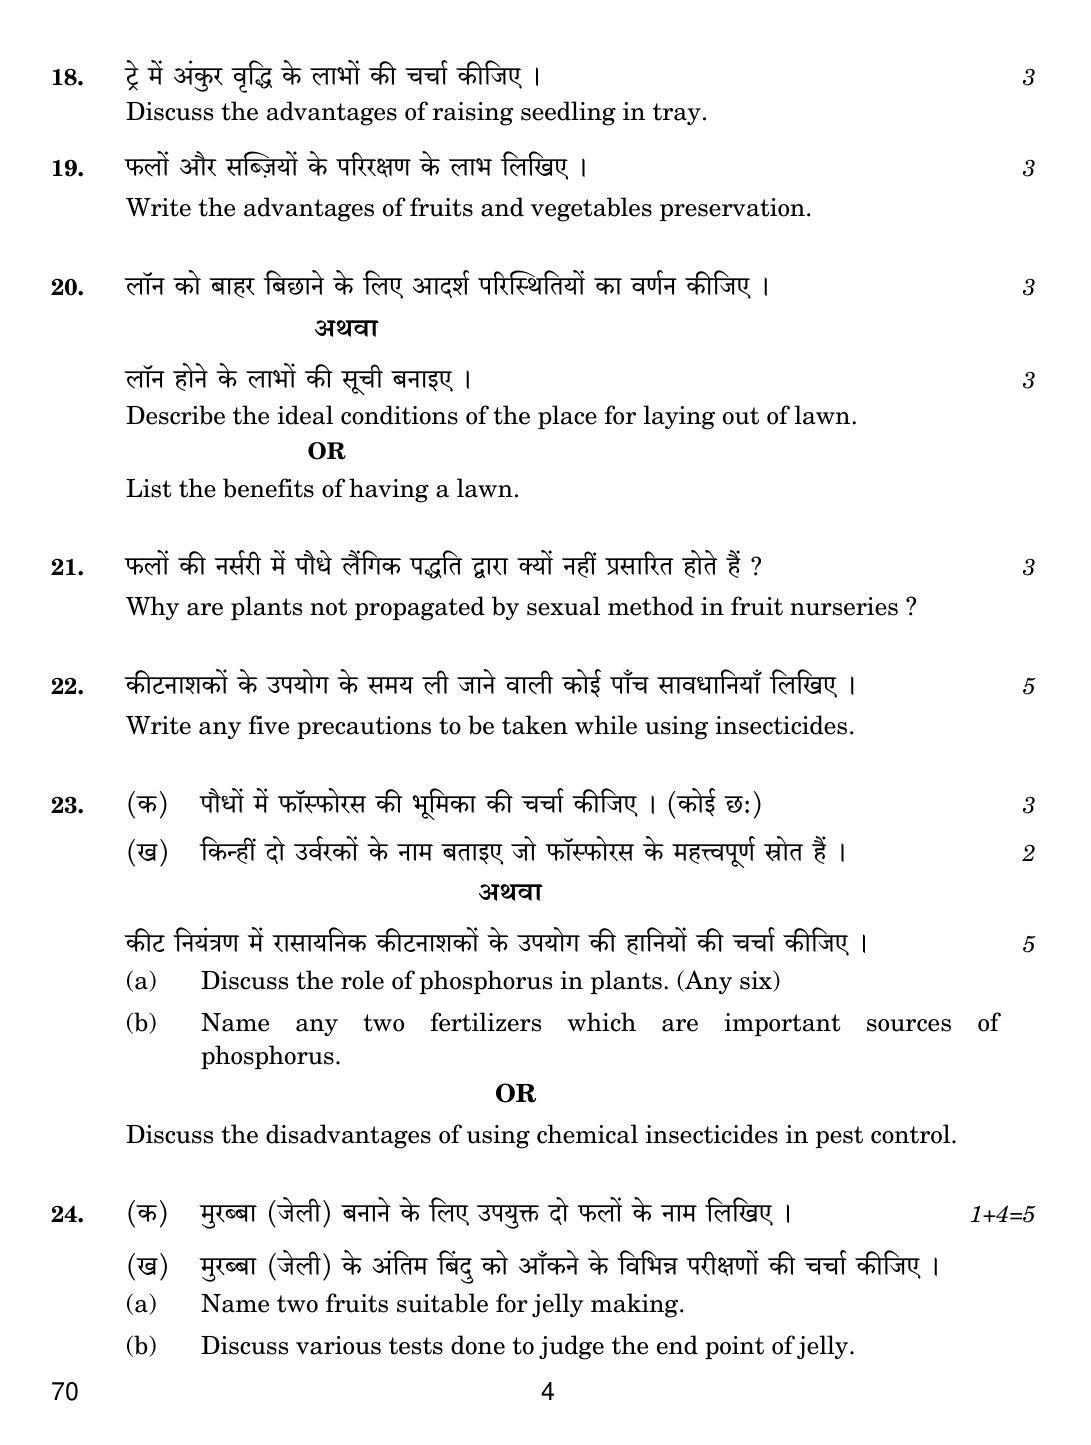 CBSE Class 12 70 AGRICULTURE 2019 Compartment Question Paper - Page 4